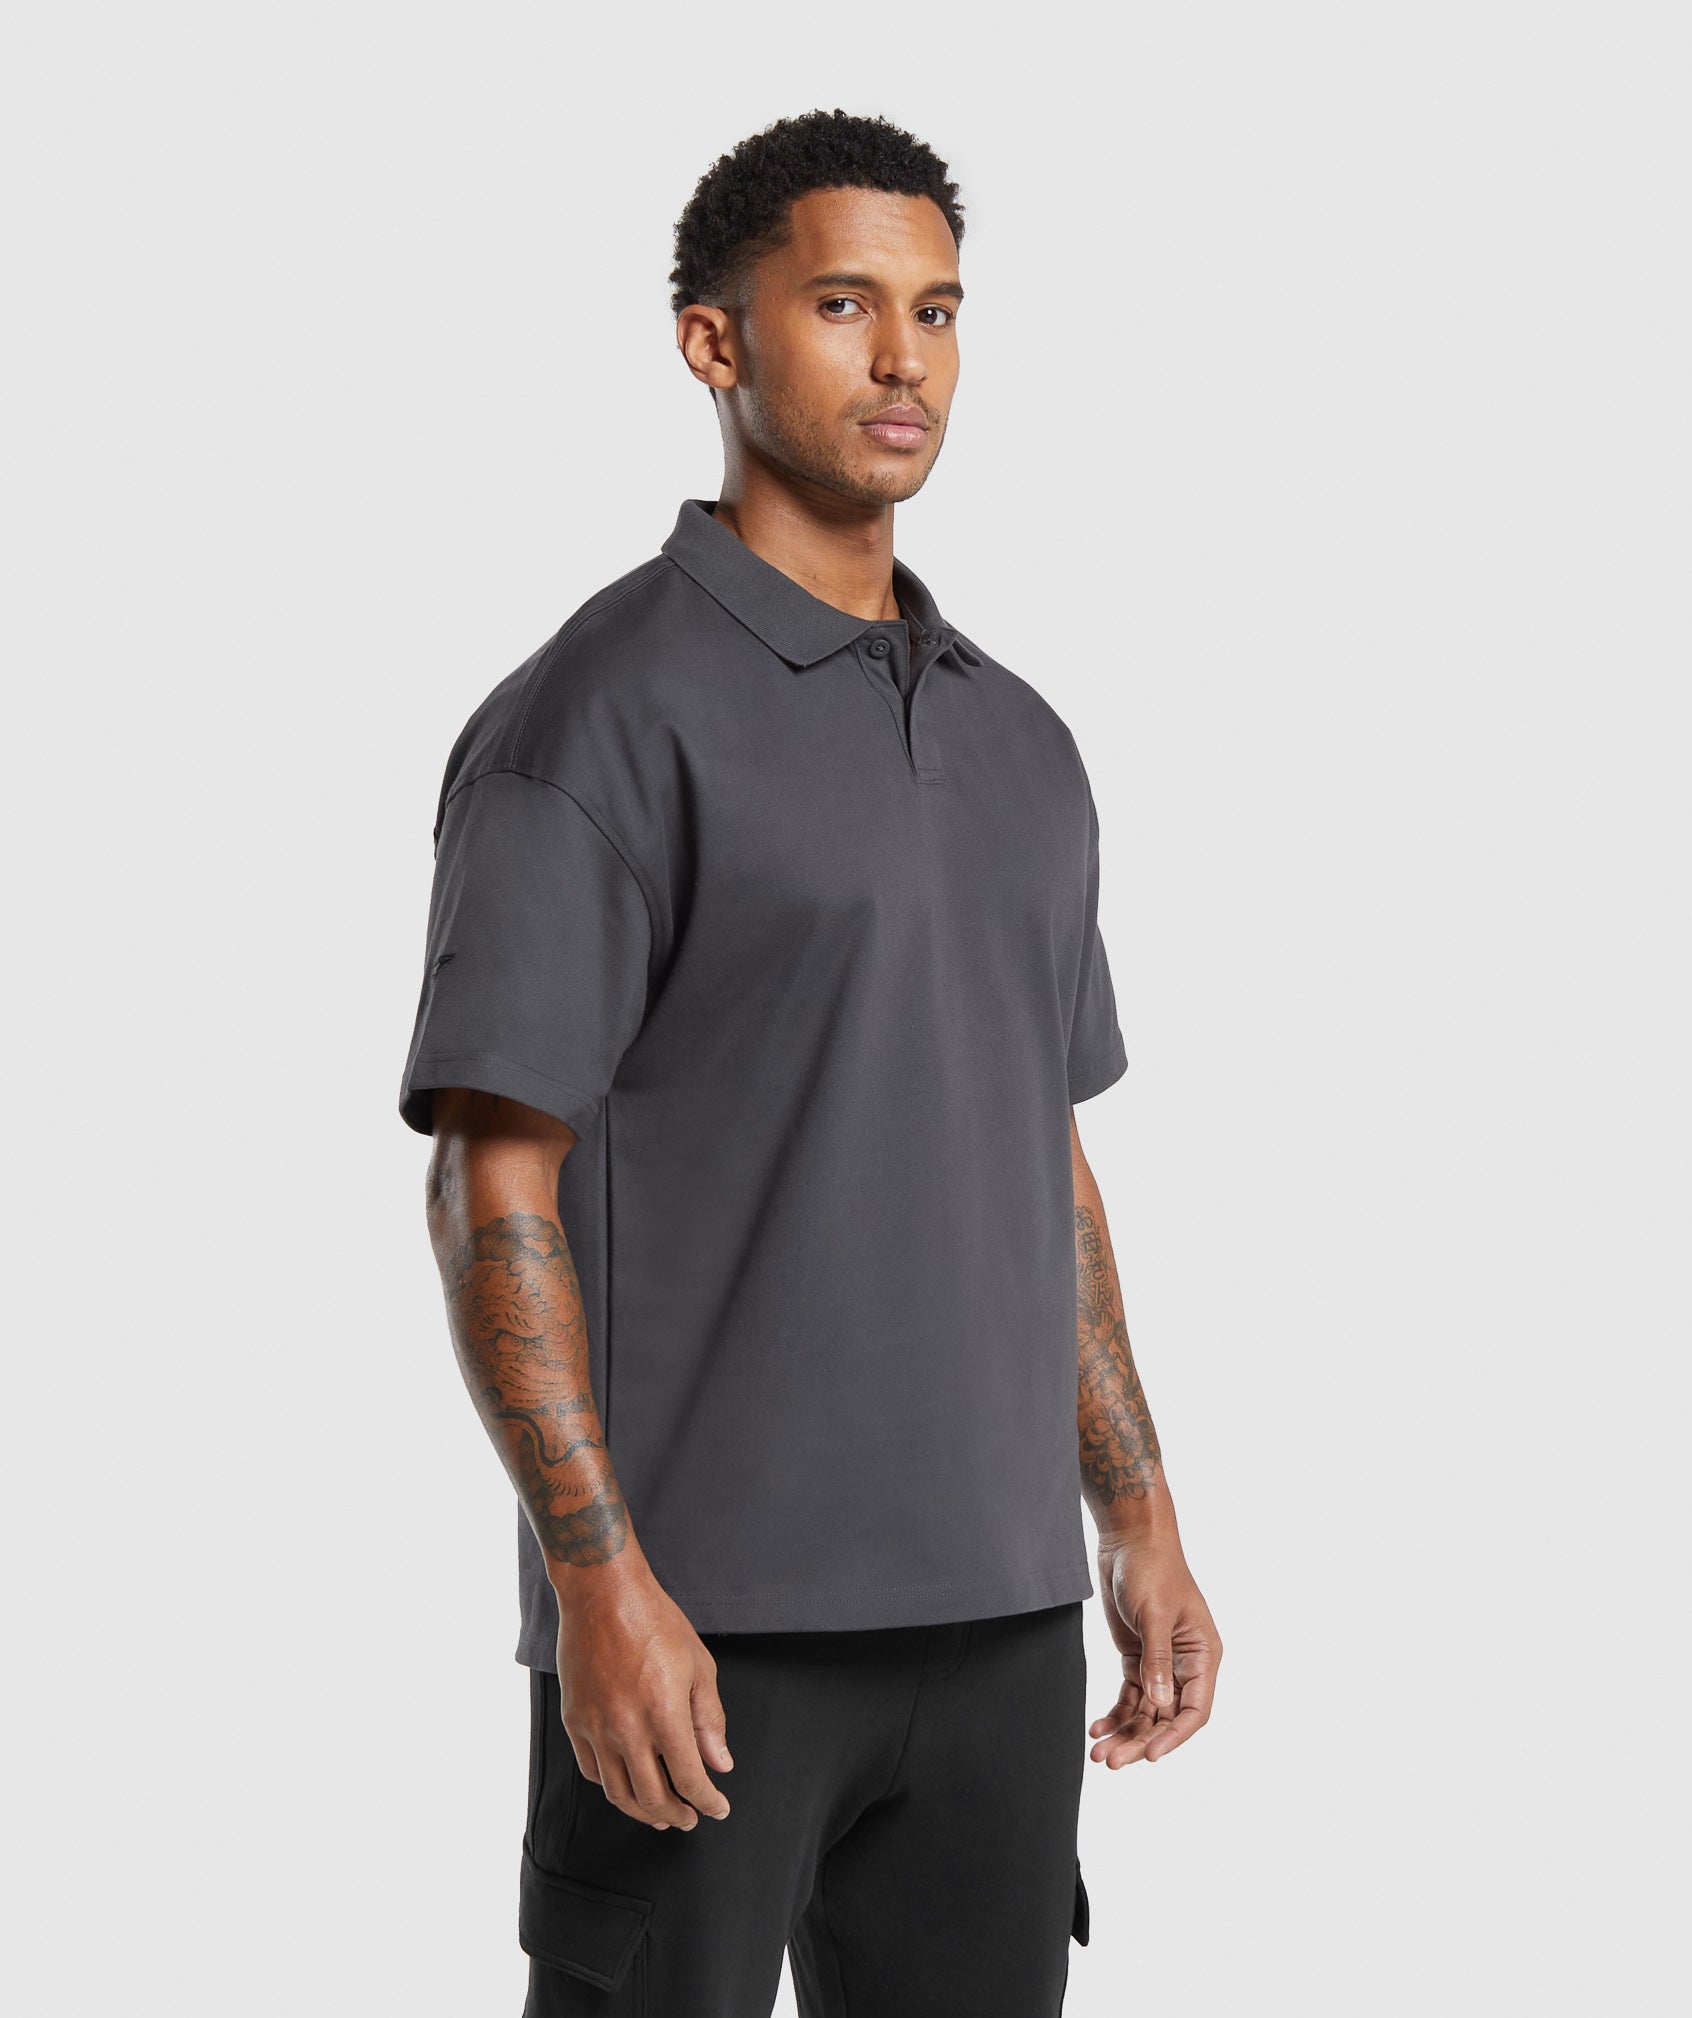 Short Sleeve Polo in Onyx Grey - view 3